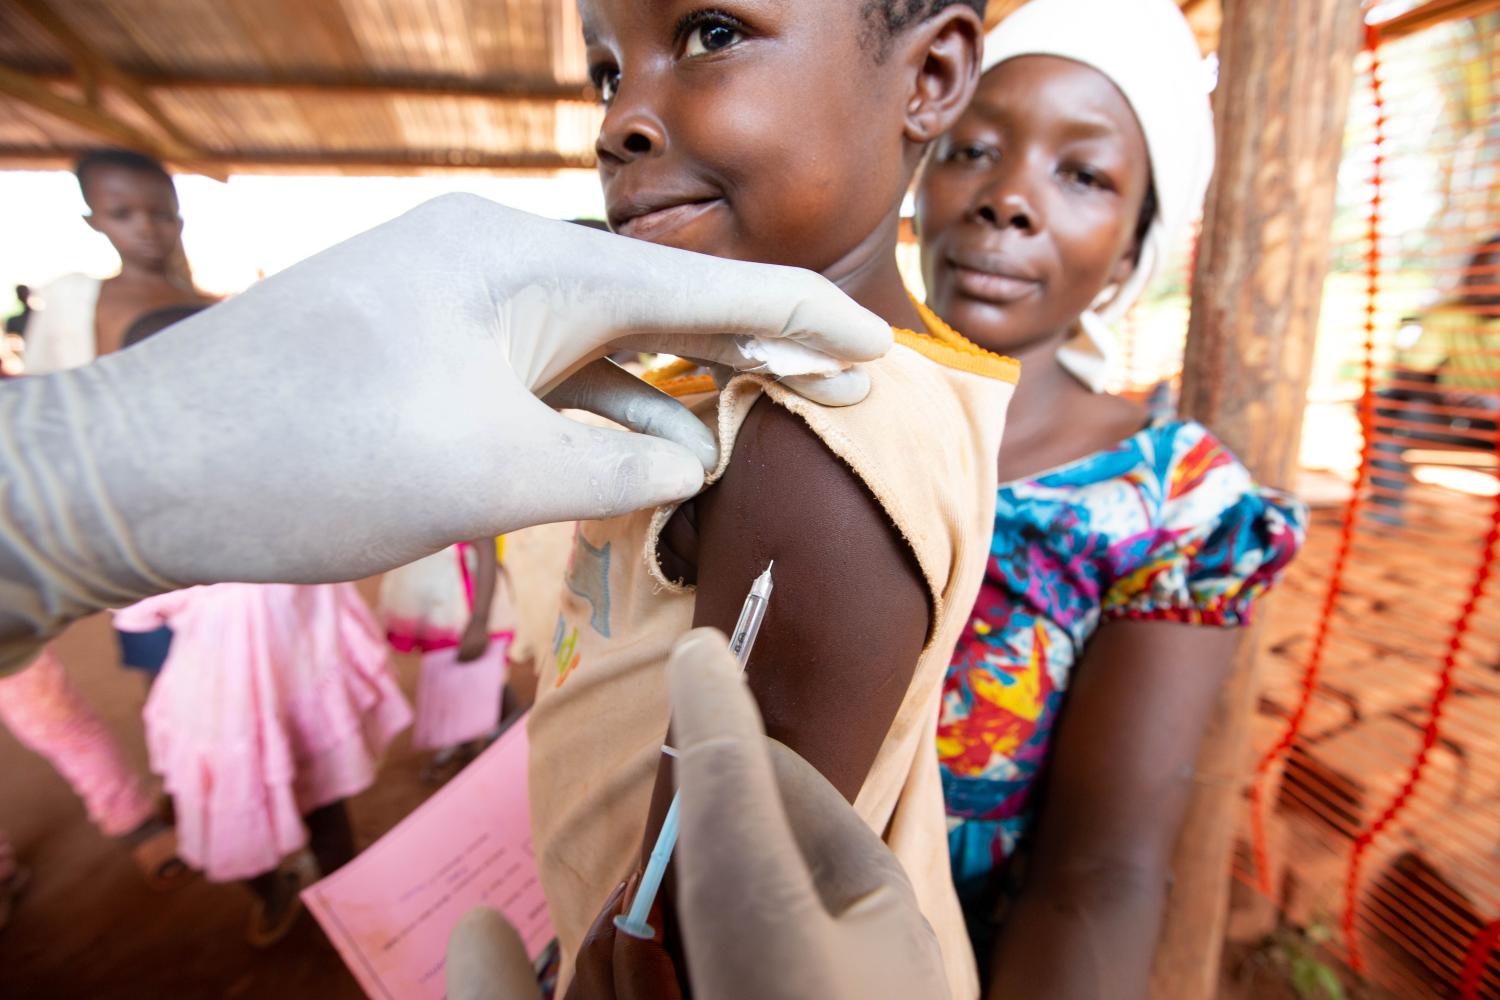 A child is given a measles vaccination during an emergency campaign run by Doctors Without Borders (MSF) in Likasa, Mongala province in northern Democratic Republic of Congo March 3, 2020. Picture taken March 3, 2020. REUTERS/Hereward Holland